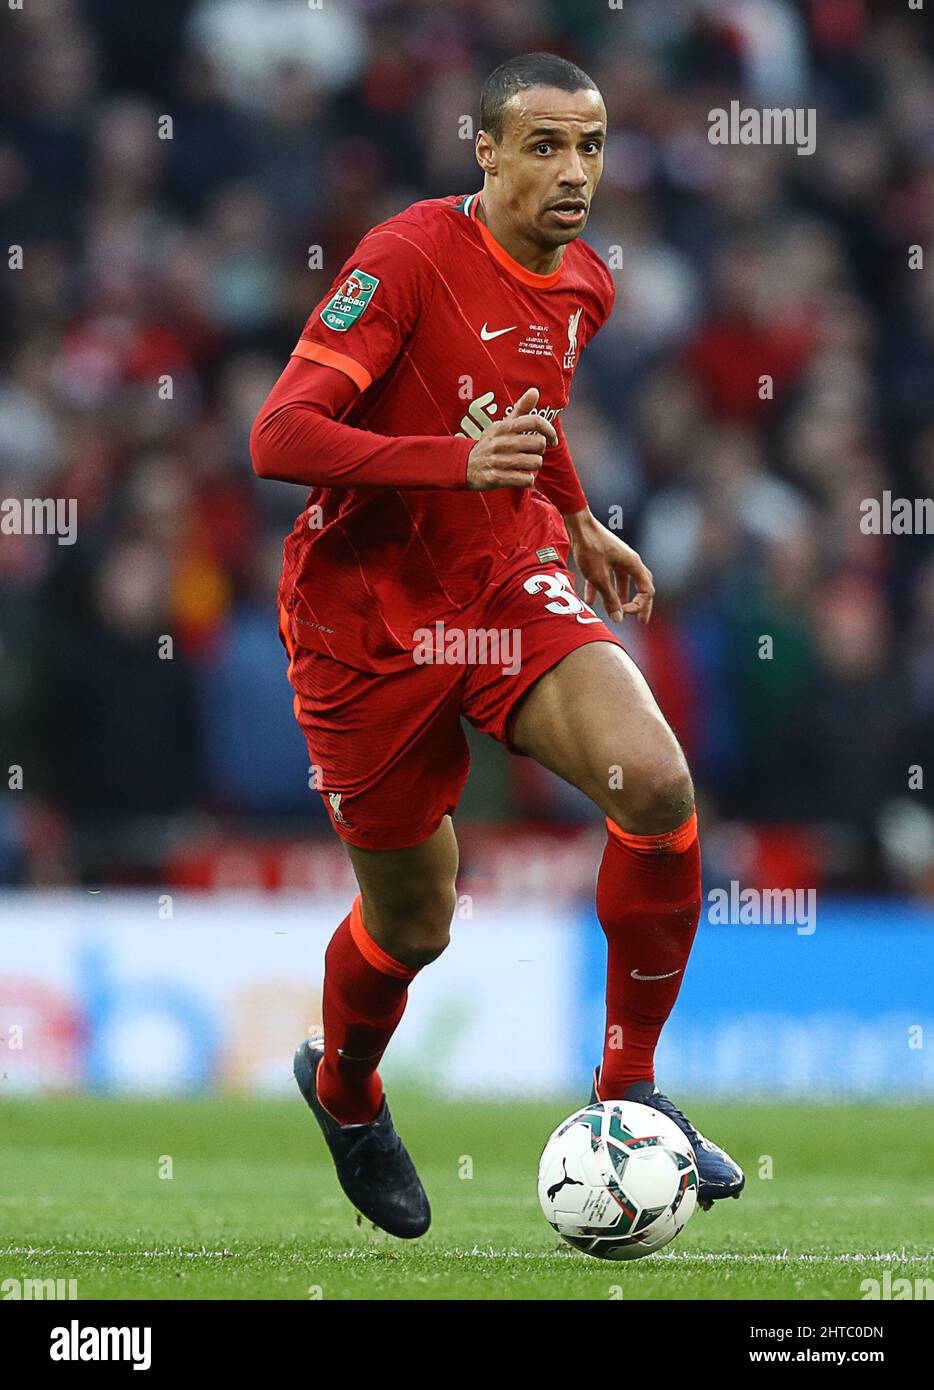 London, England, 27th February 2022. Joel Matip of Liverpool during the Carabao Cup match at Wembley Stadium, London. Picture credit should read: Paul Terry / Sportimage Credit: Sportimage/Alamy Live News Stock Photo